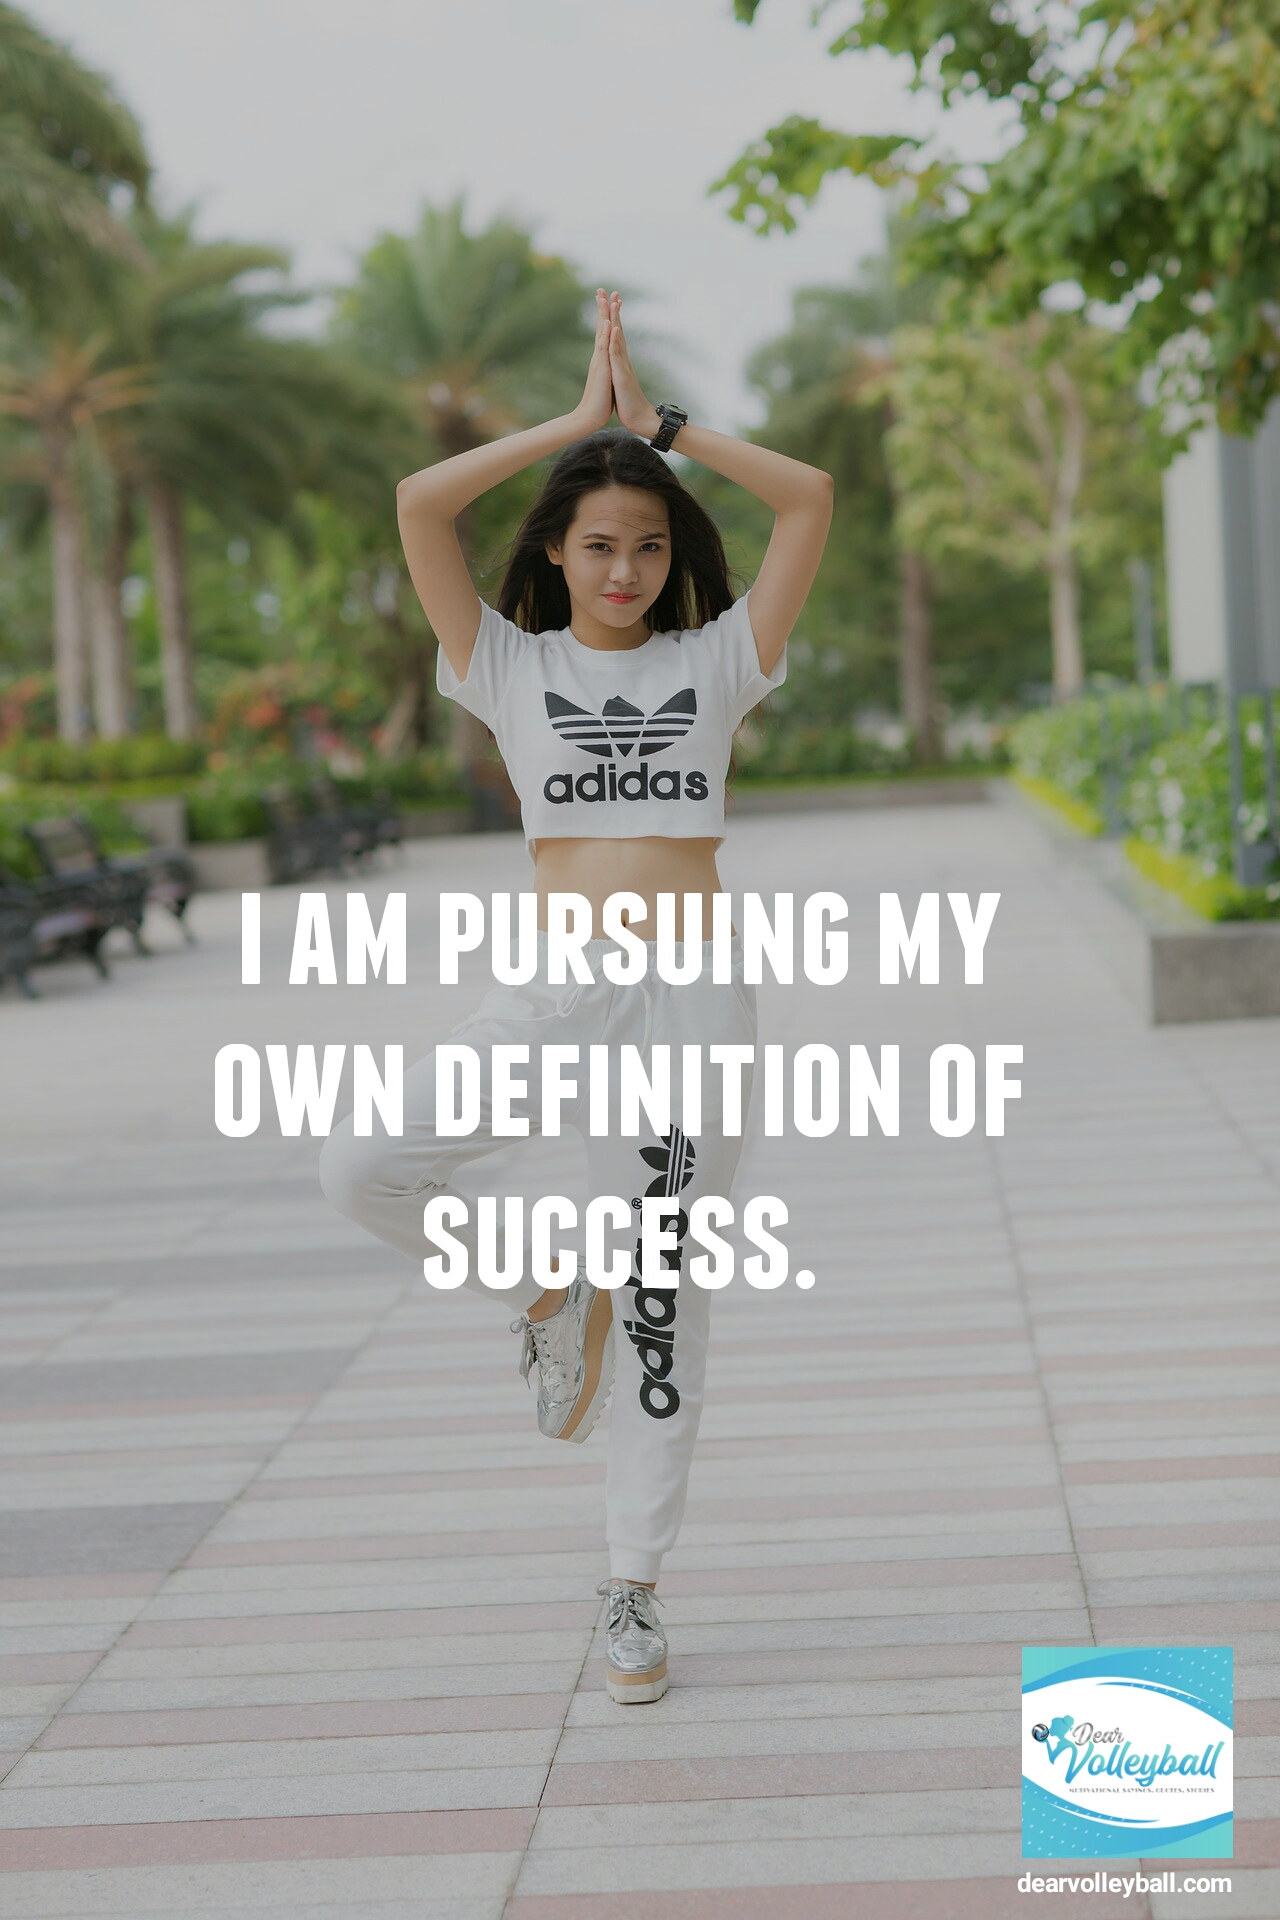 "I am pursuing my own definition of success." and other strong girls pictures paired with an inspirational volleyball quote on Dear Volleyball.com.